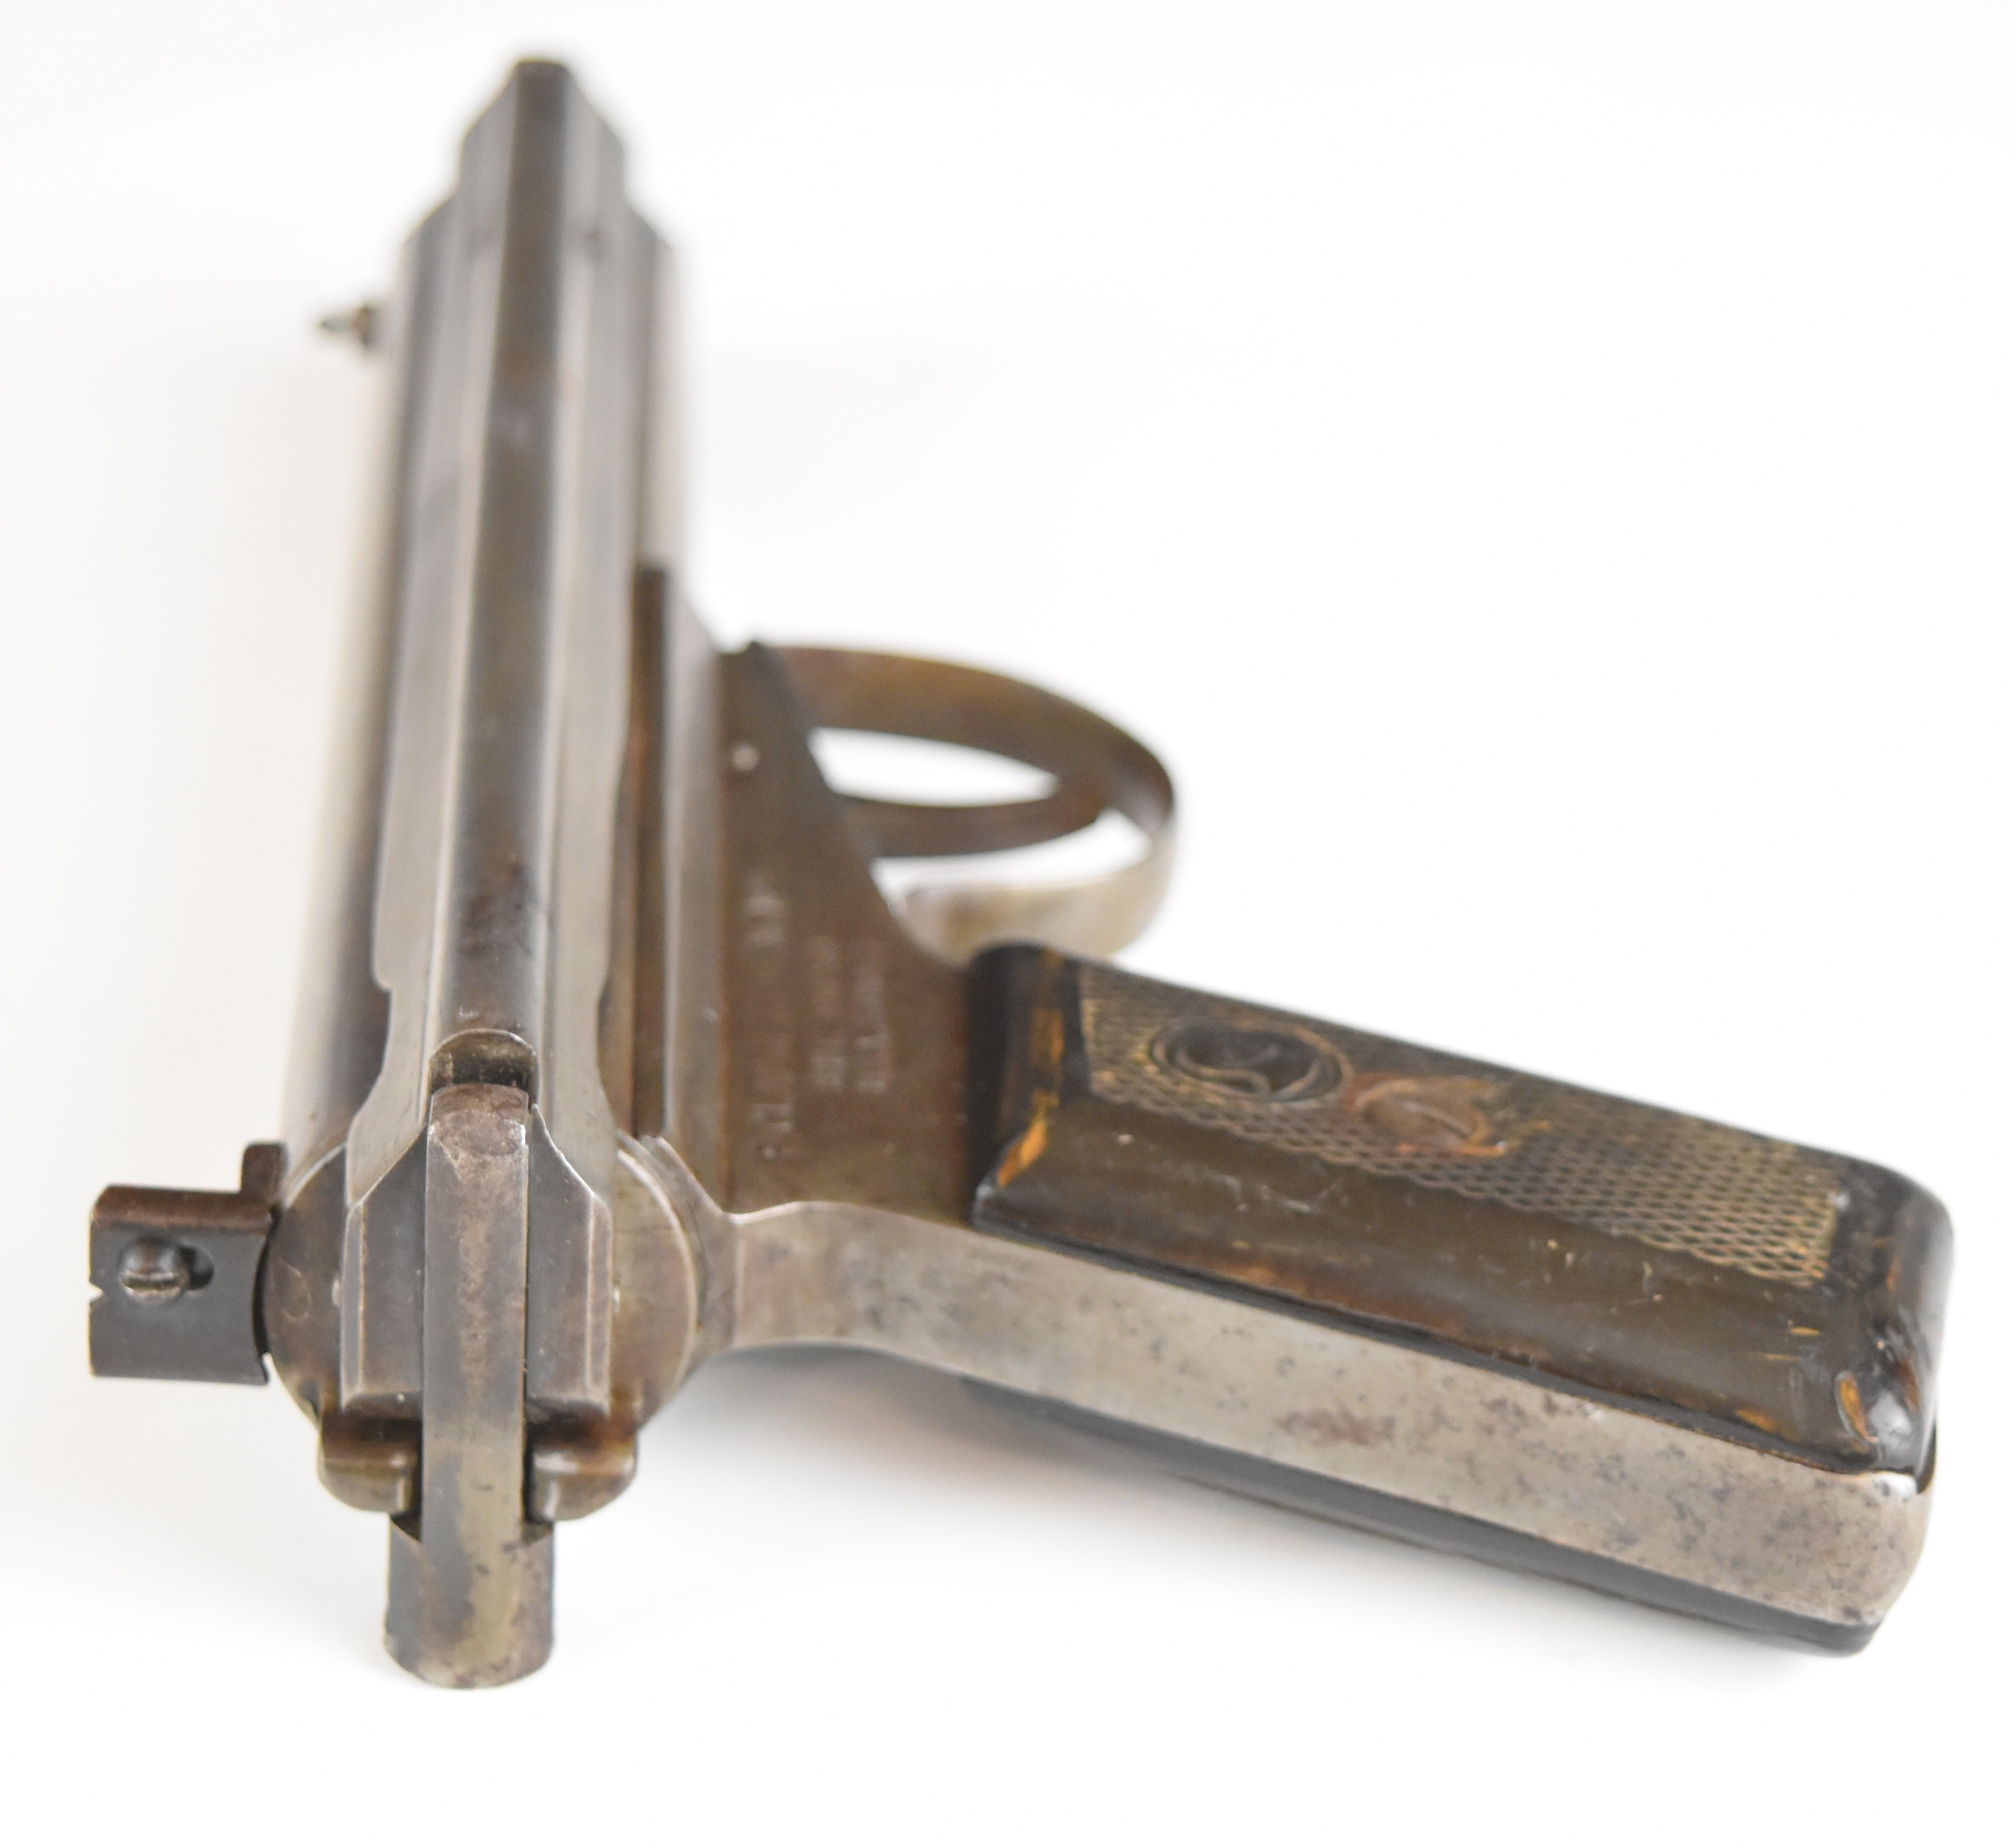 Accles & Shelvoke Ltd F Clarke patent The Warrior .177 side lever air pistol with logo and - Image 3 of 12